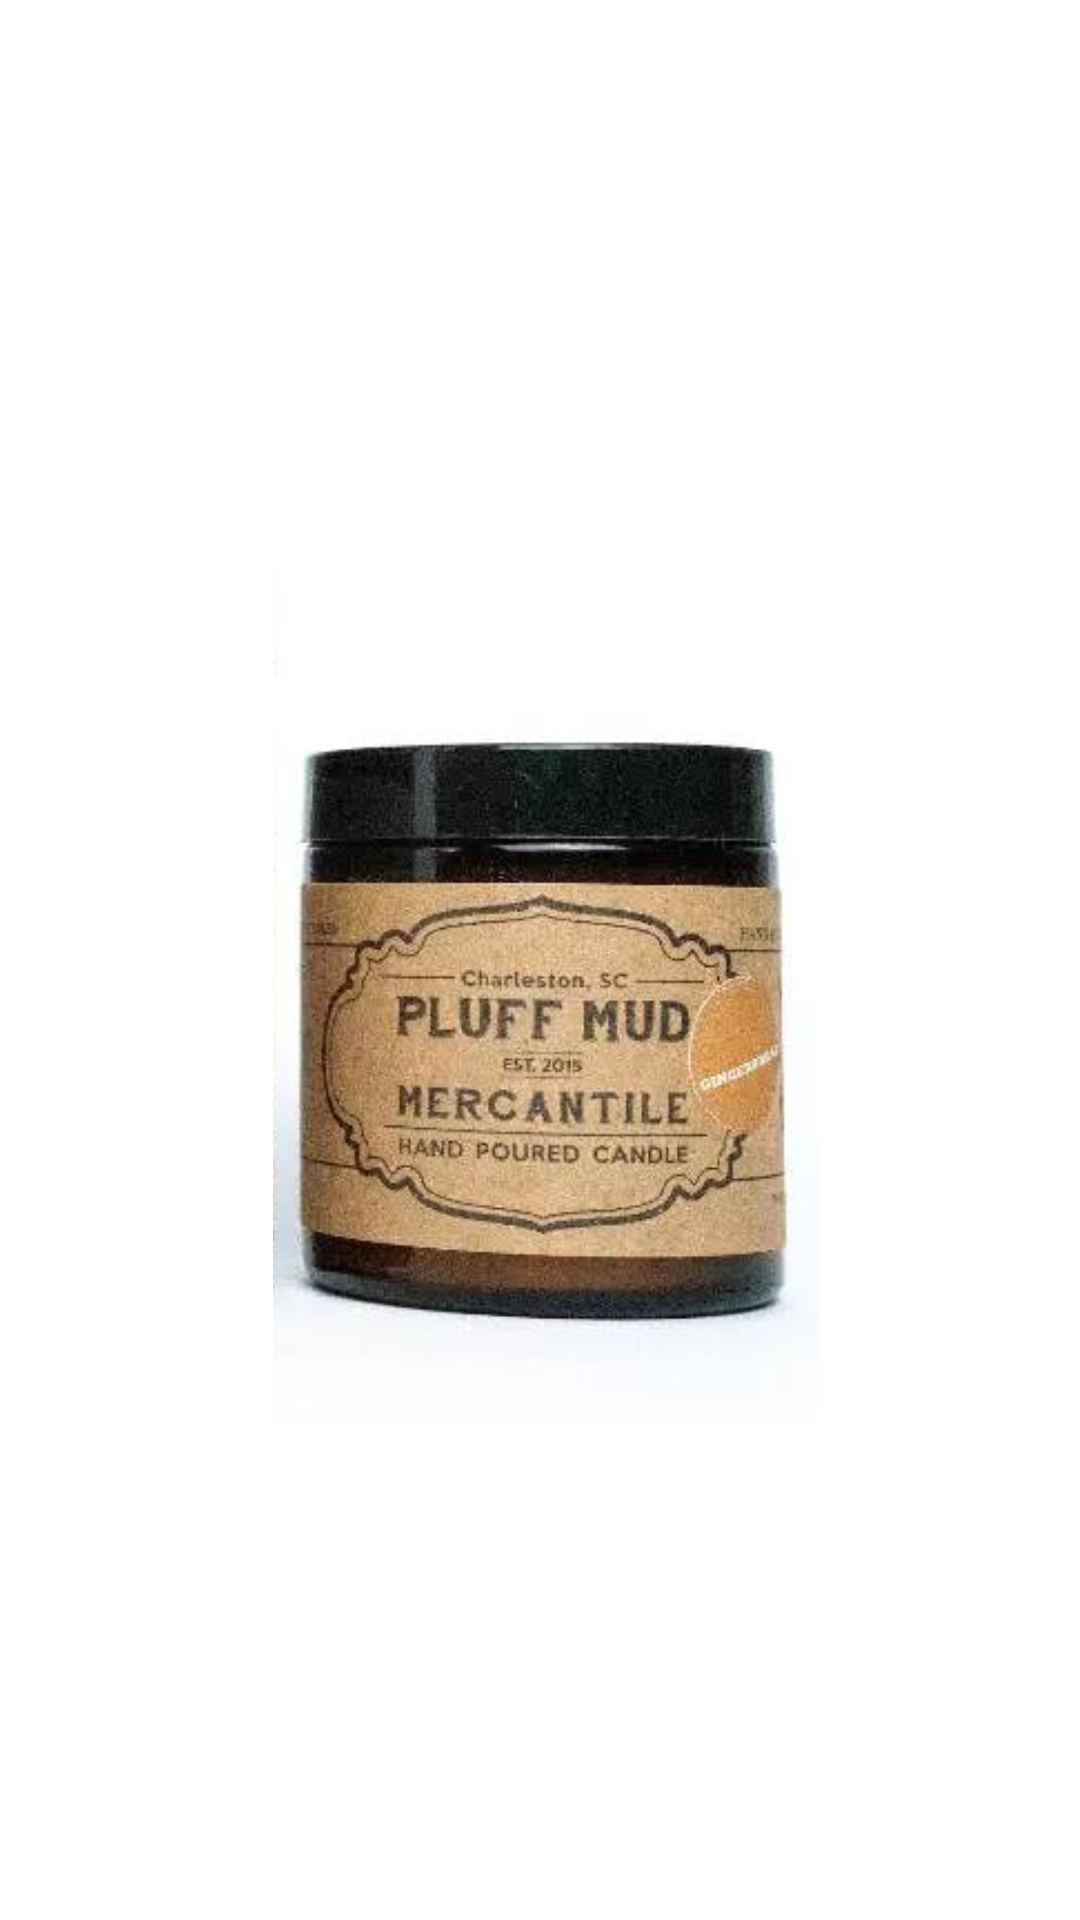 Charleston Lily Poured Soy Candle - Pluff Mud Mercantile